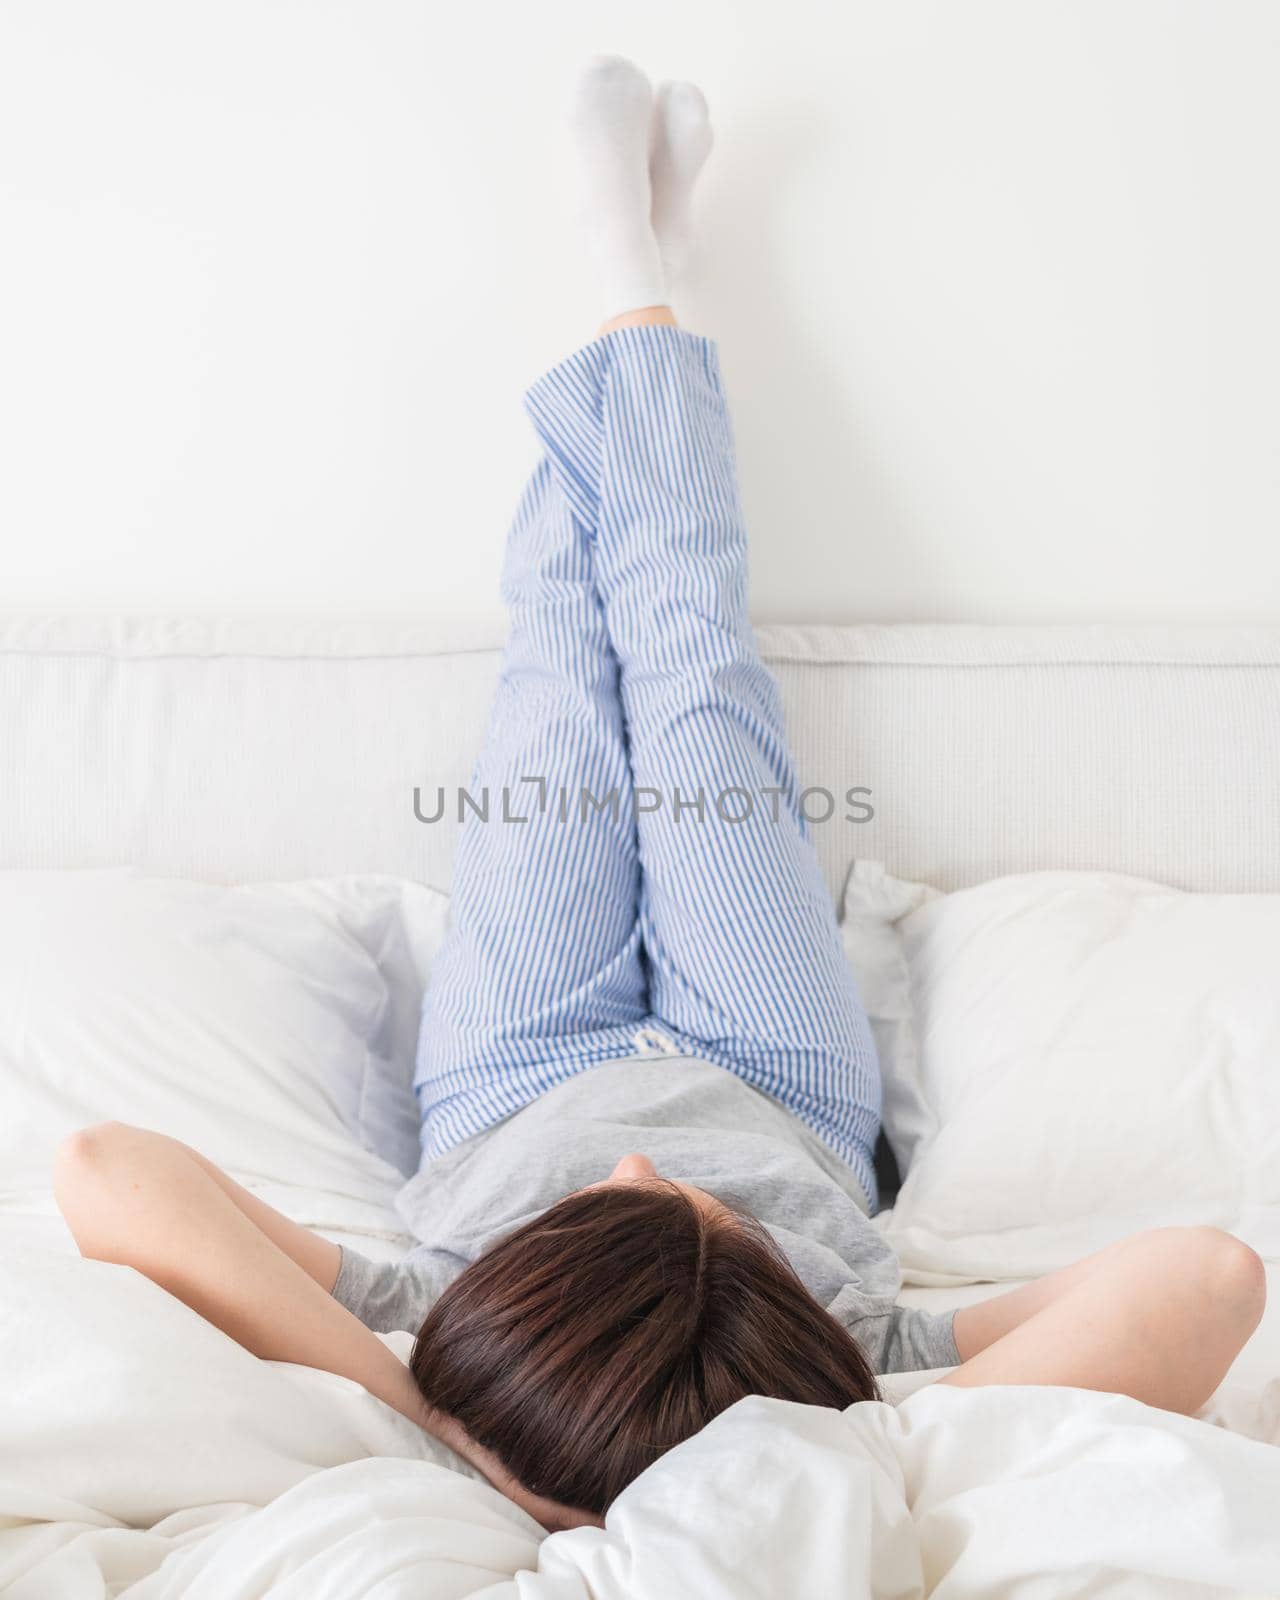 Female legs raised up high and arms under her head lying on bed in bedroom wearing pajamas by Mariakray